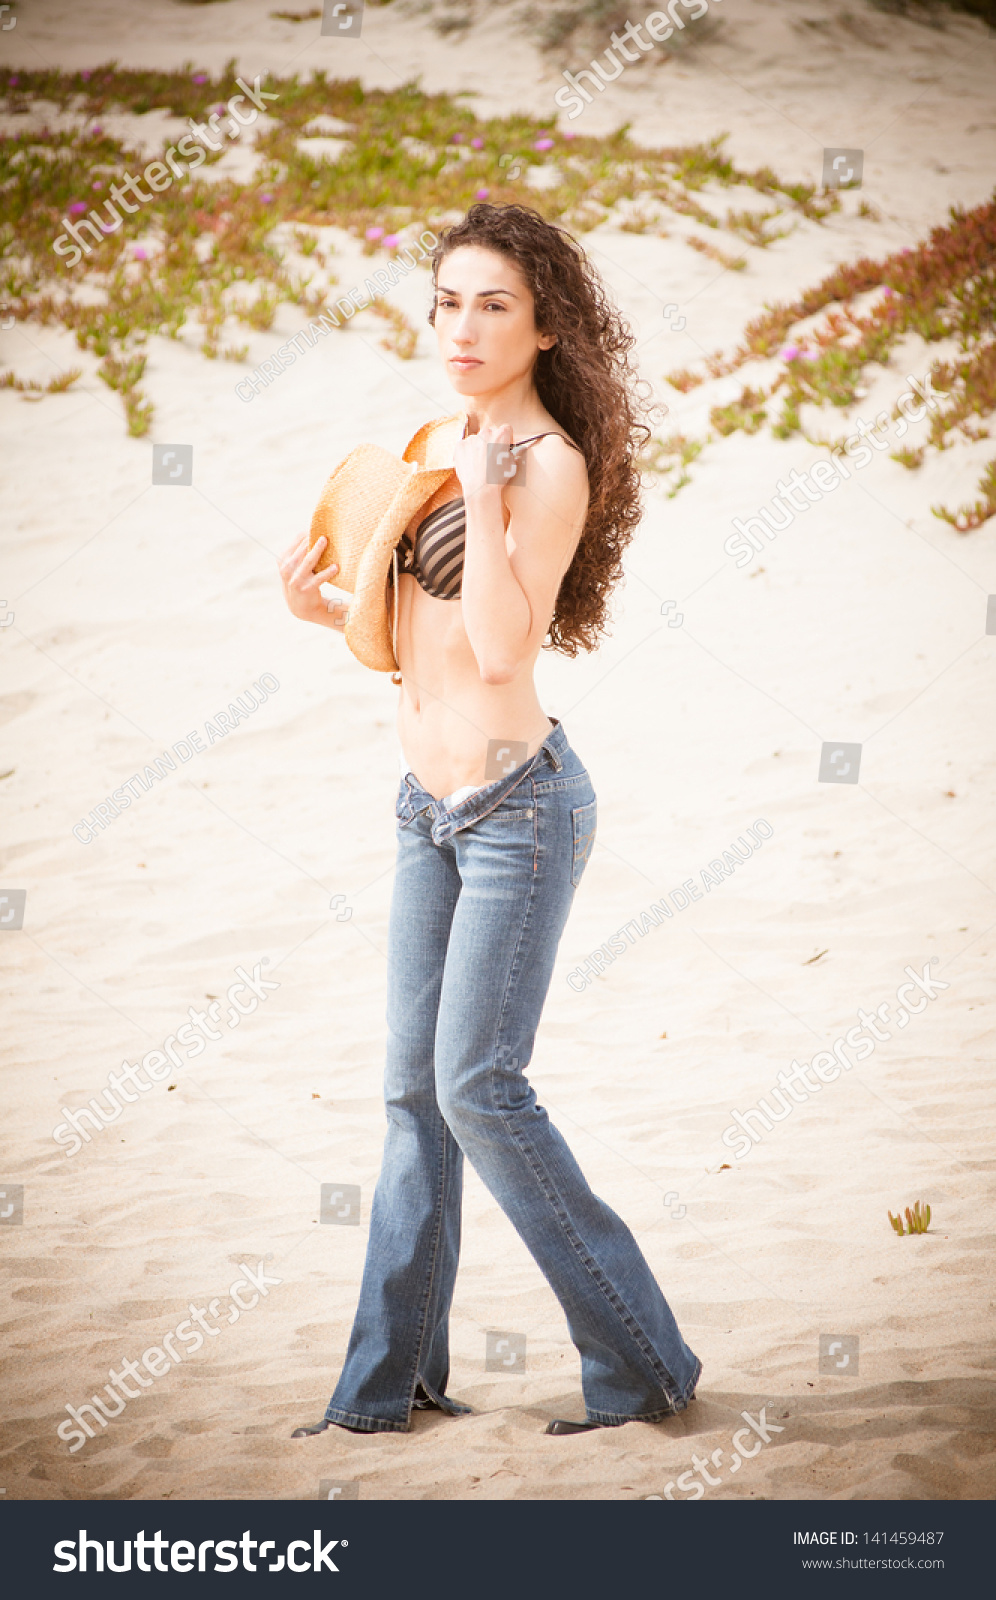 Topless Wearing Jeans